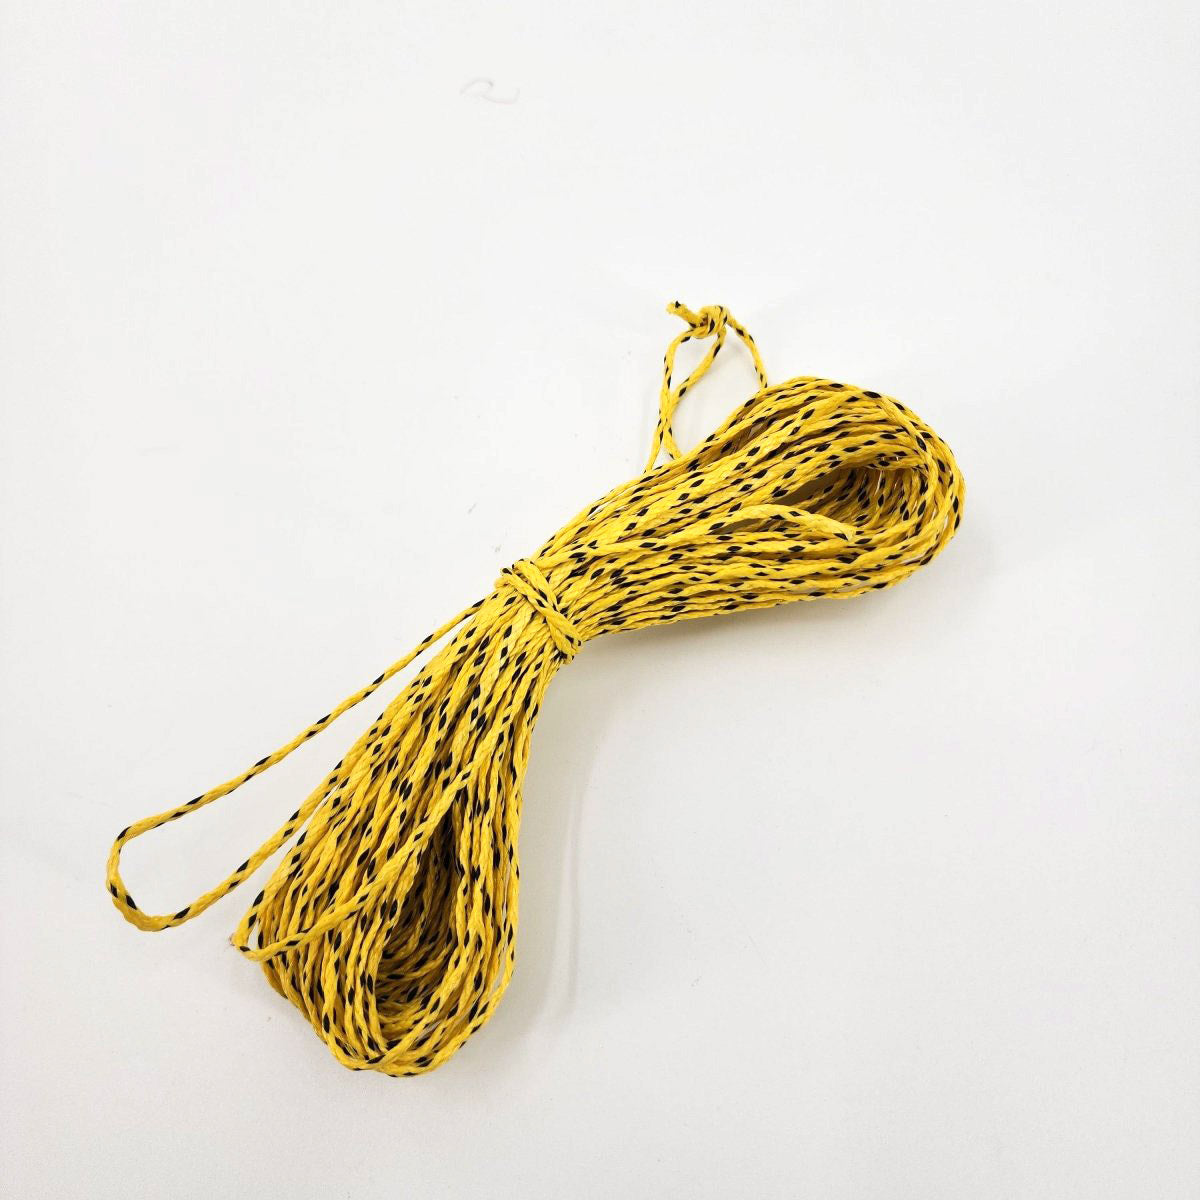 50 Foot Long Packaged Rope at